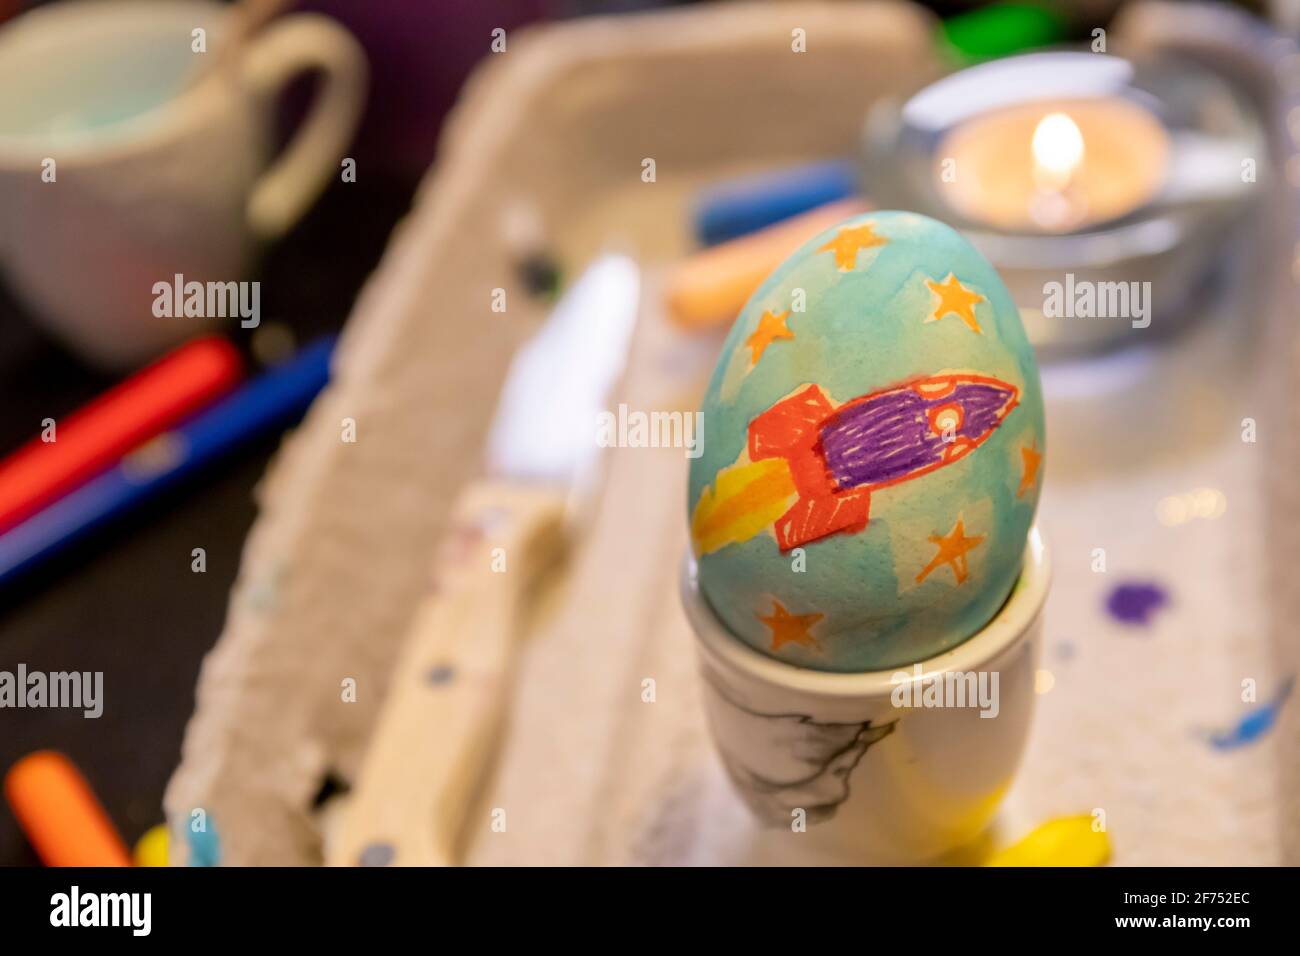 Easter egg painting and decorating activity concept: Colorful handmade Easter eggs. Preparation for the holidays. Stationary objects on the table. Stock Photo